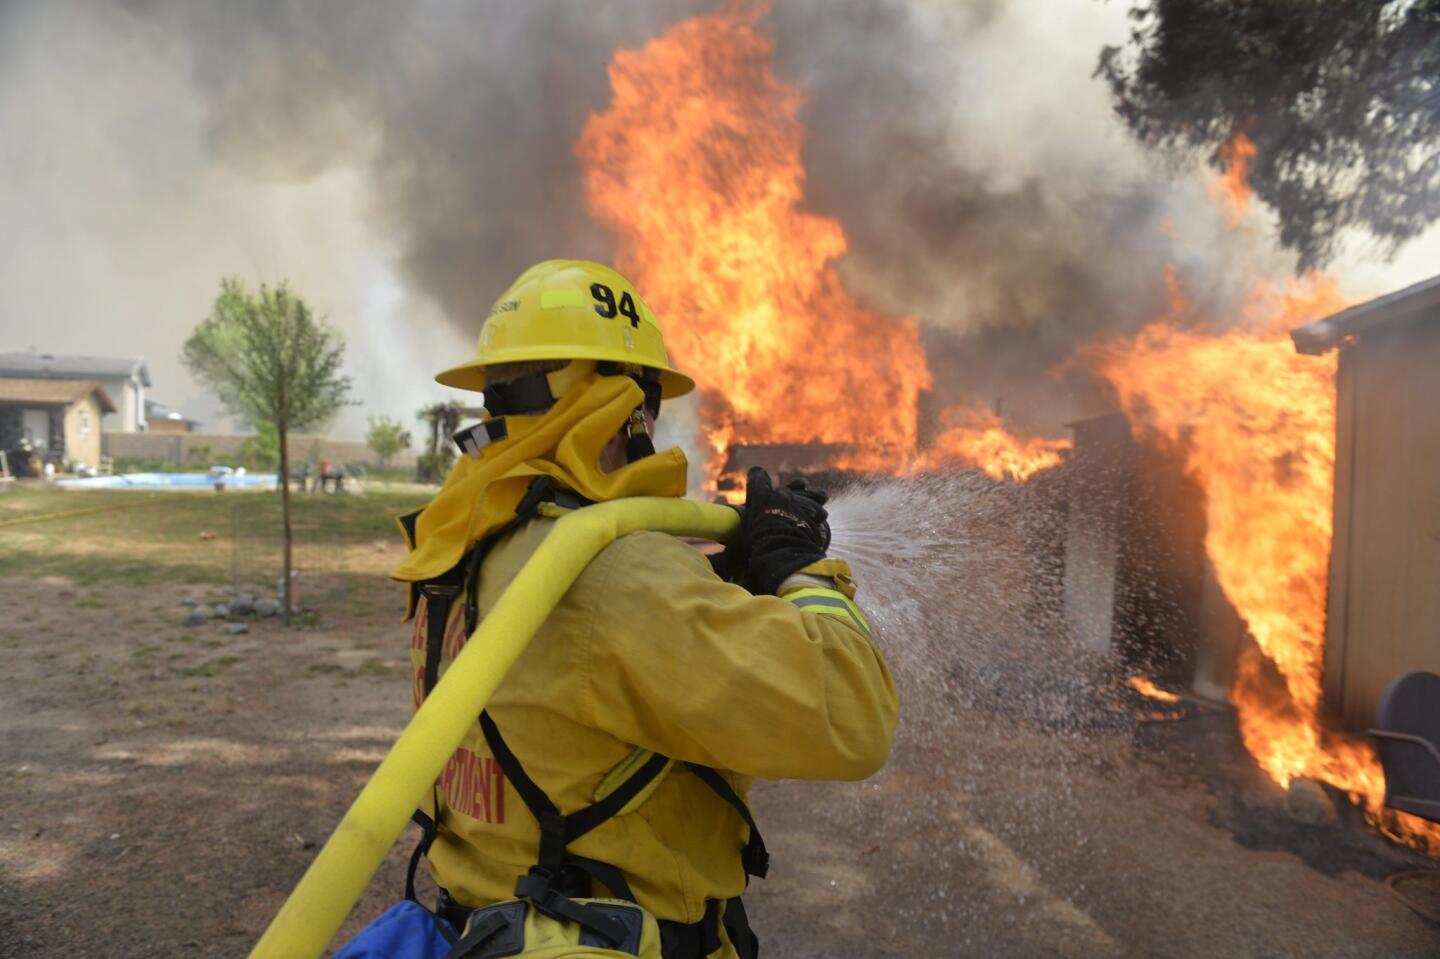 A firefighter battling the River Bottom fire sprays water on burning buildings near Hesperia and Apple Valley in San Bernardino County on March 31.